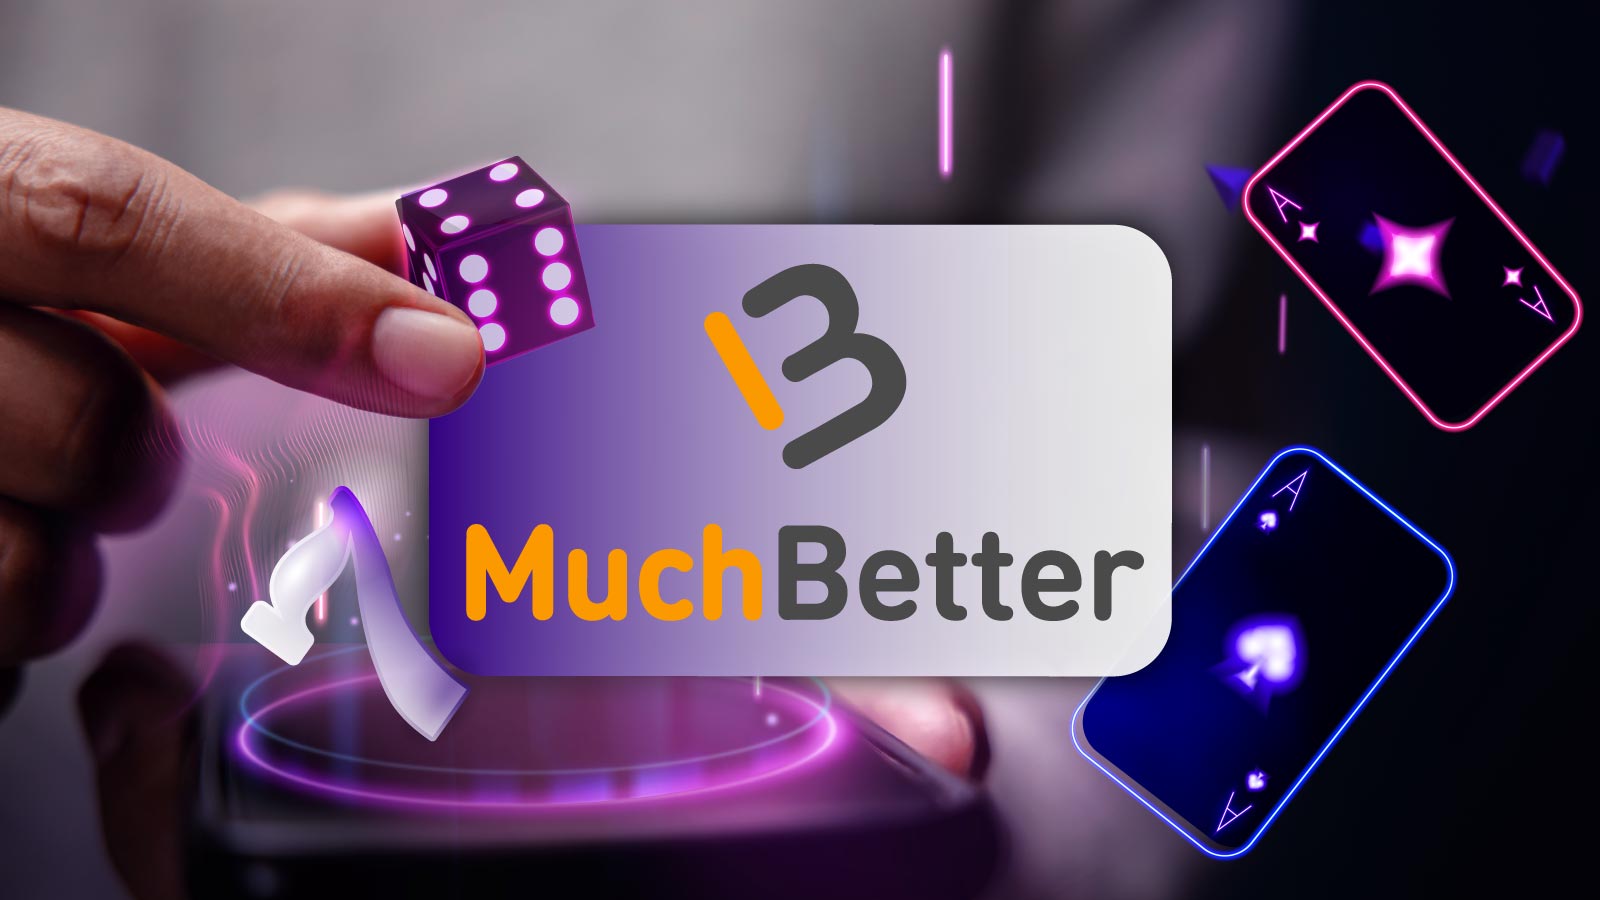 MuchBetter A Pay by Phone Option